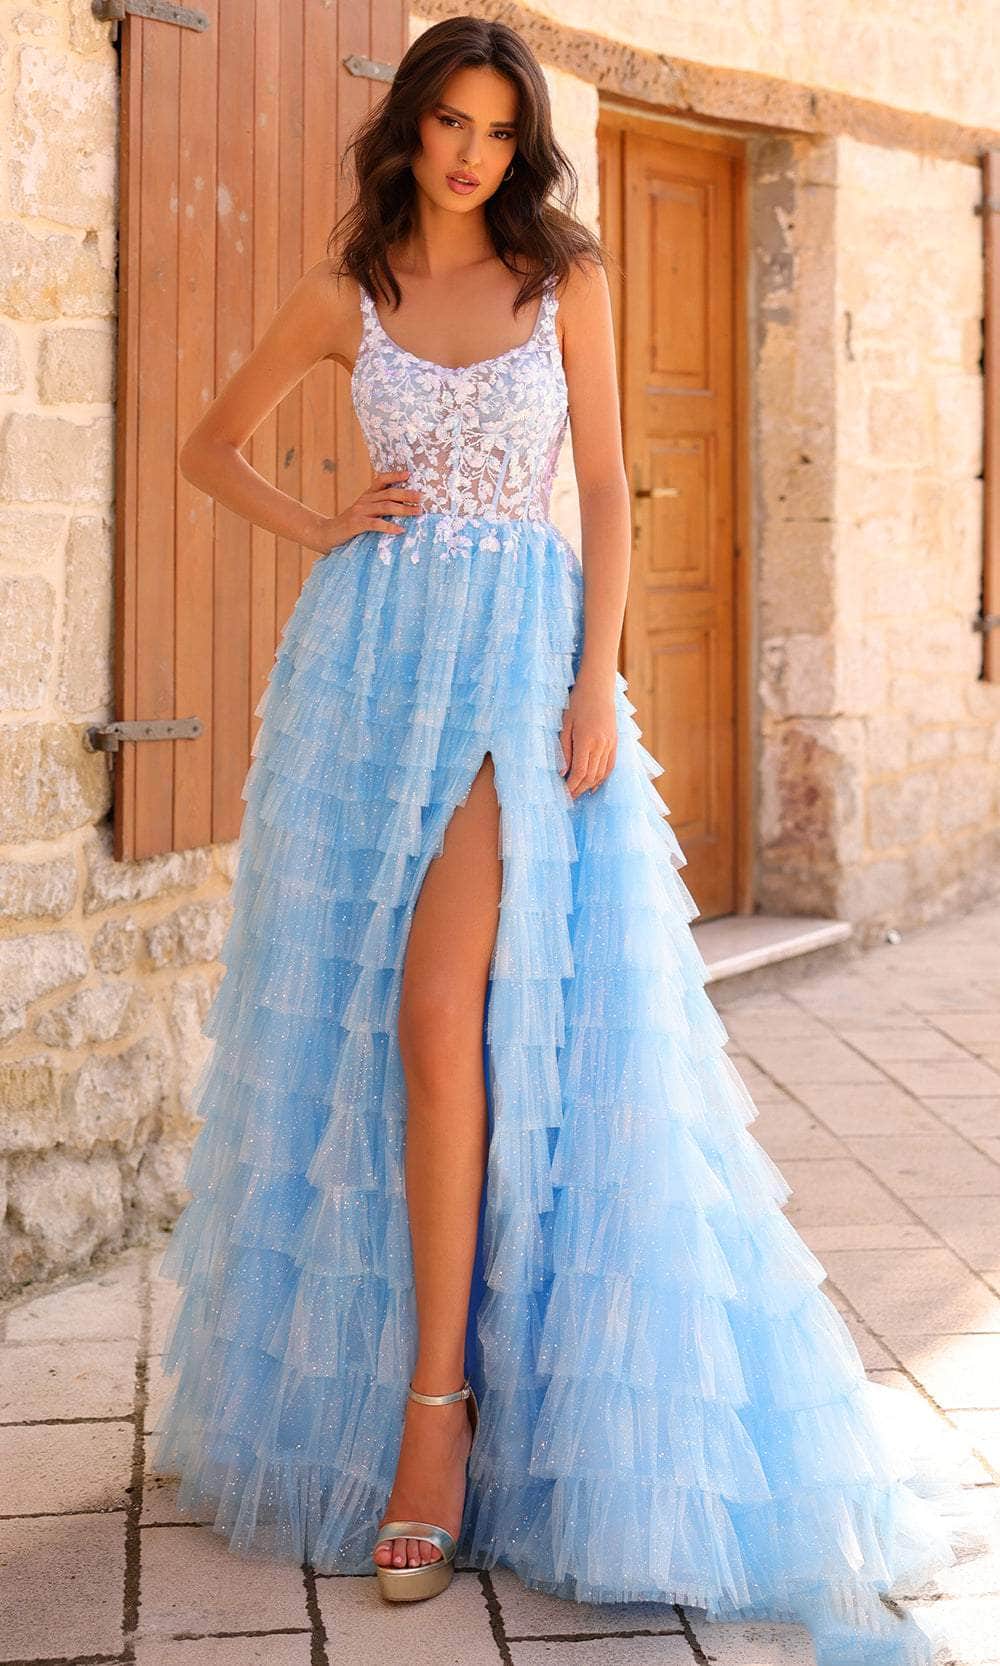 Amarra 88833 - Embroidered Prom Dress 000 / Blue